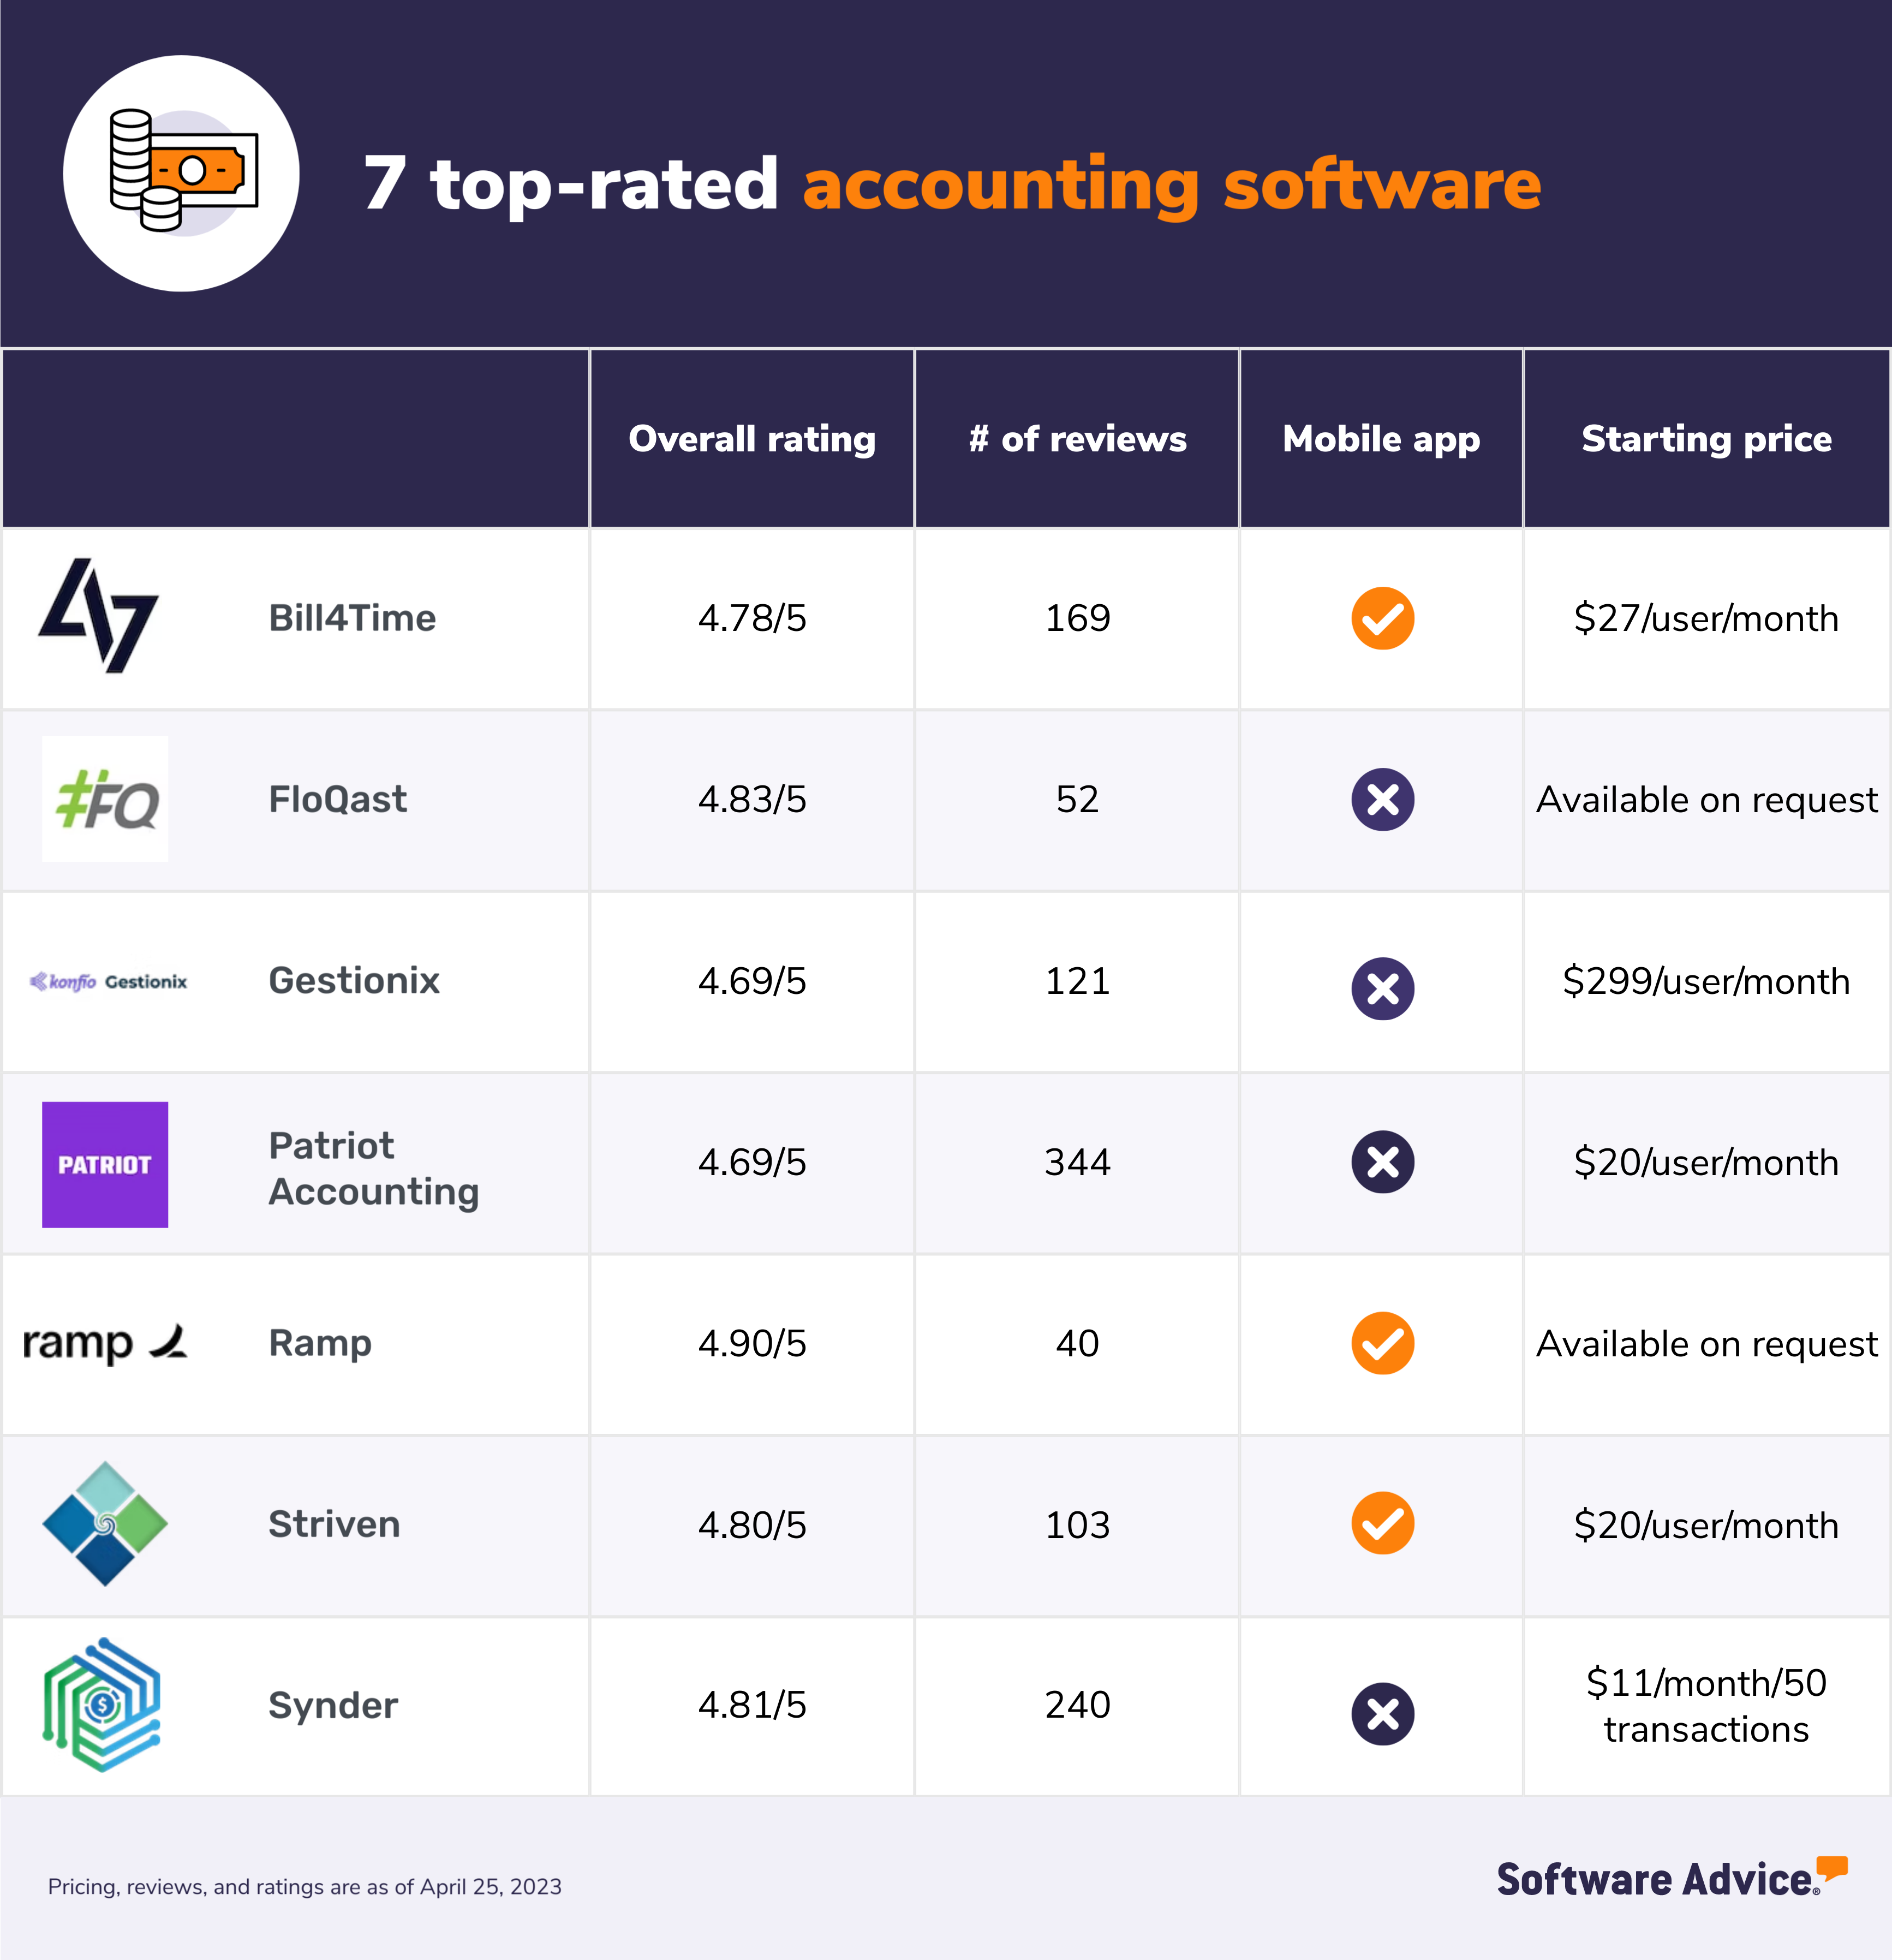 Graphic comparing 7 top-rated accounting software